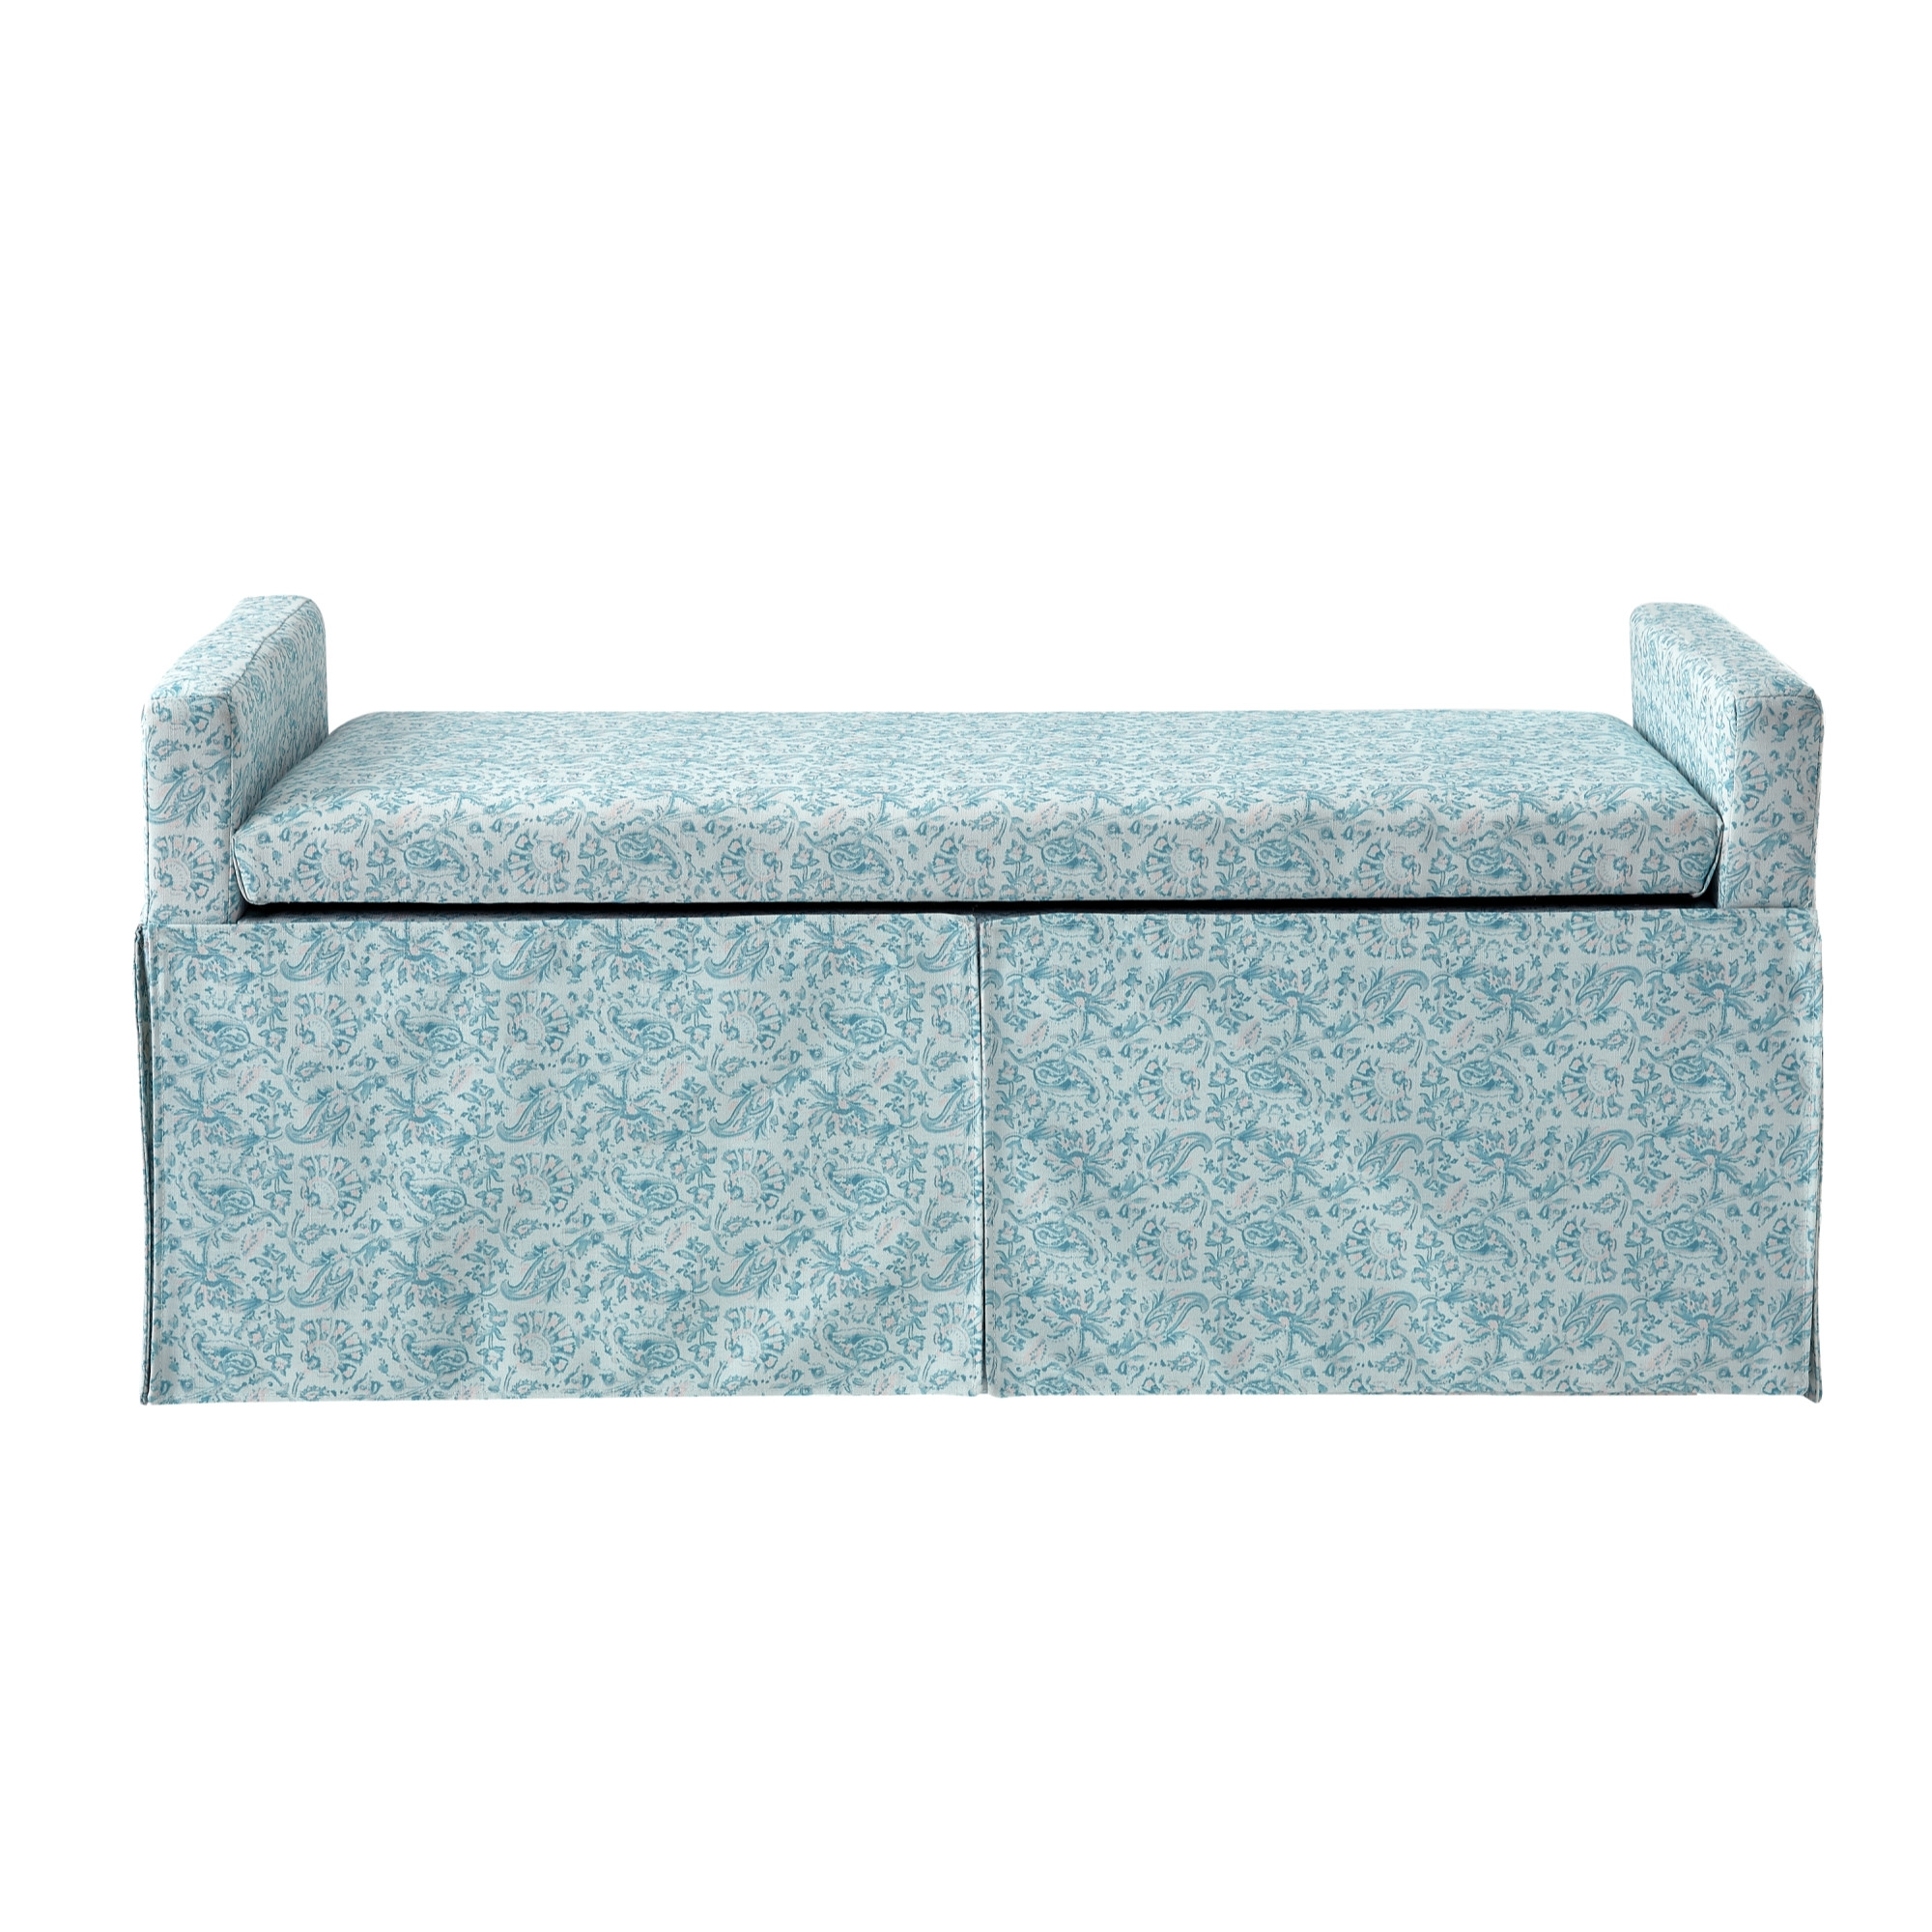 50" Blue Upholstered Linen Bench with Flip top, Shoe Storage-530677-1